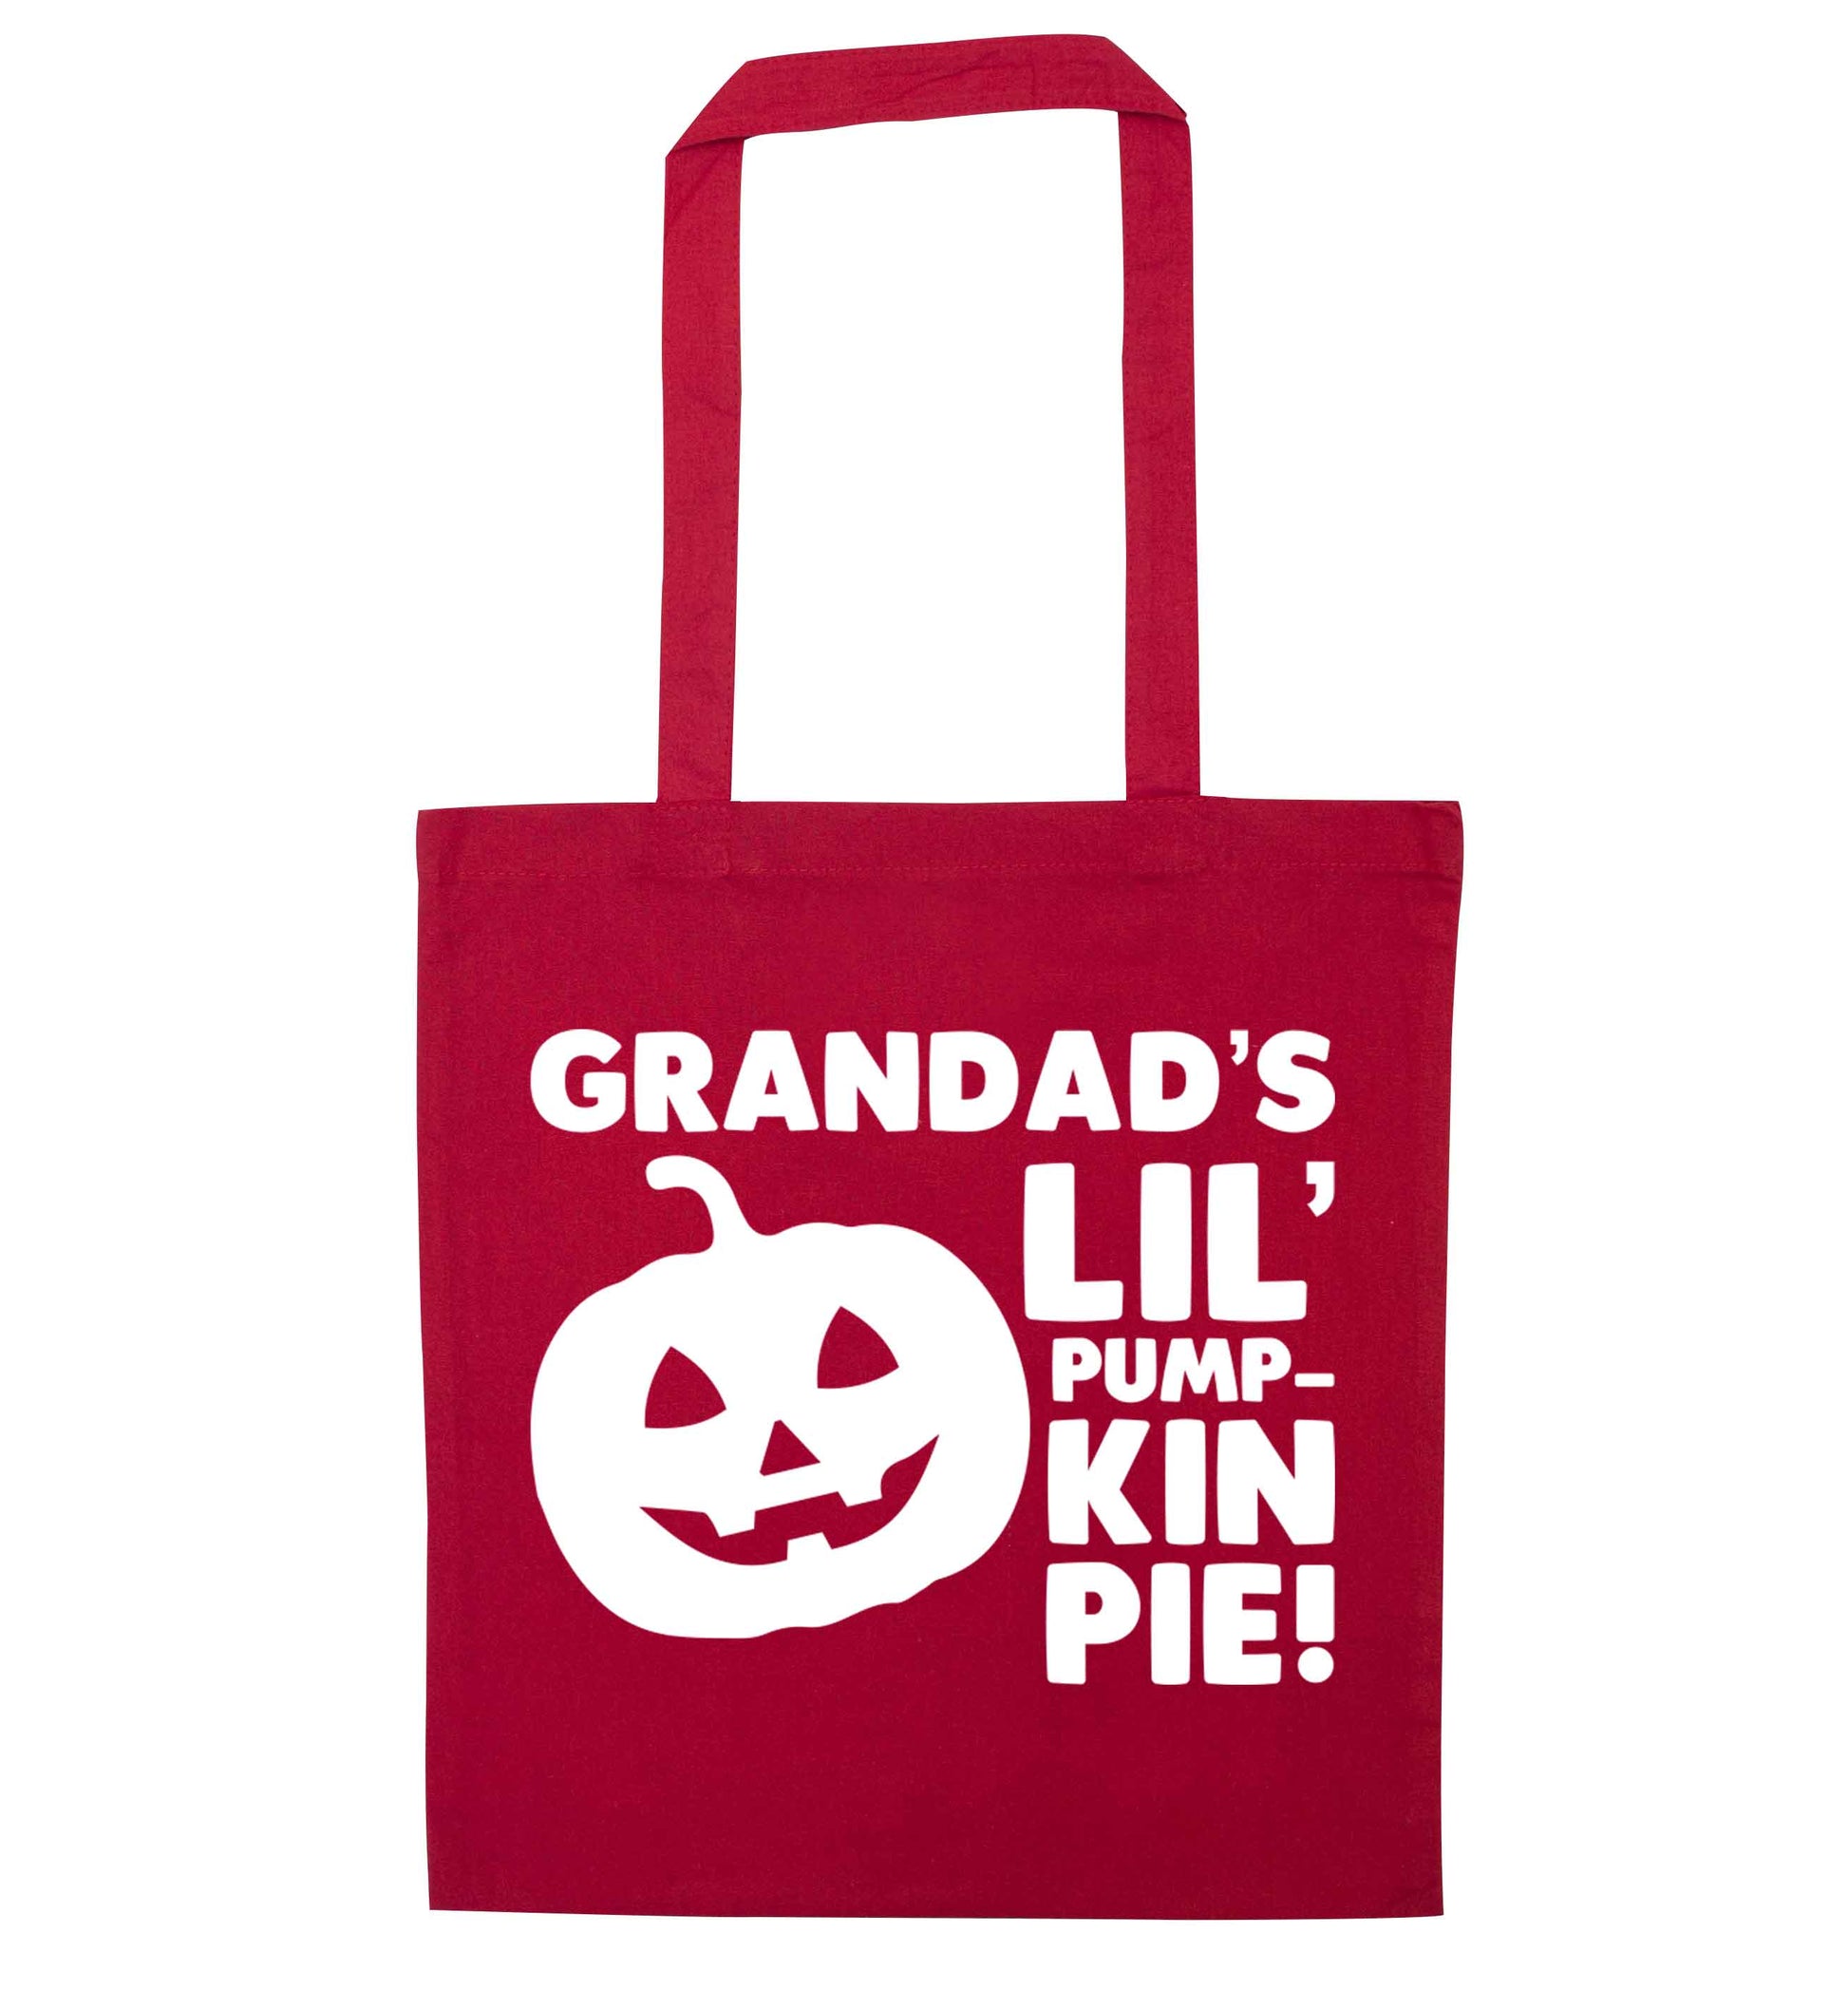 Daddy's lil' pumpkin pie red tote bag